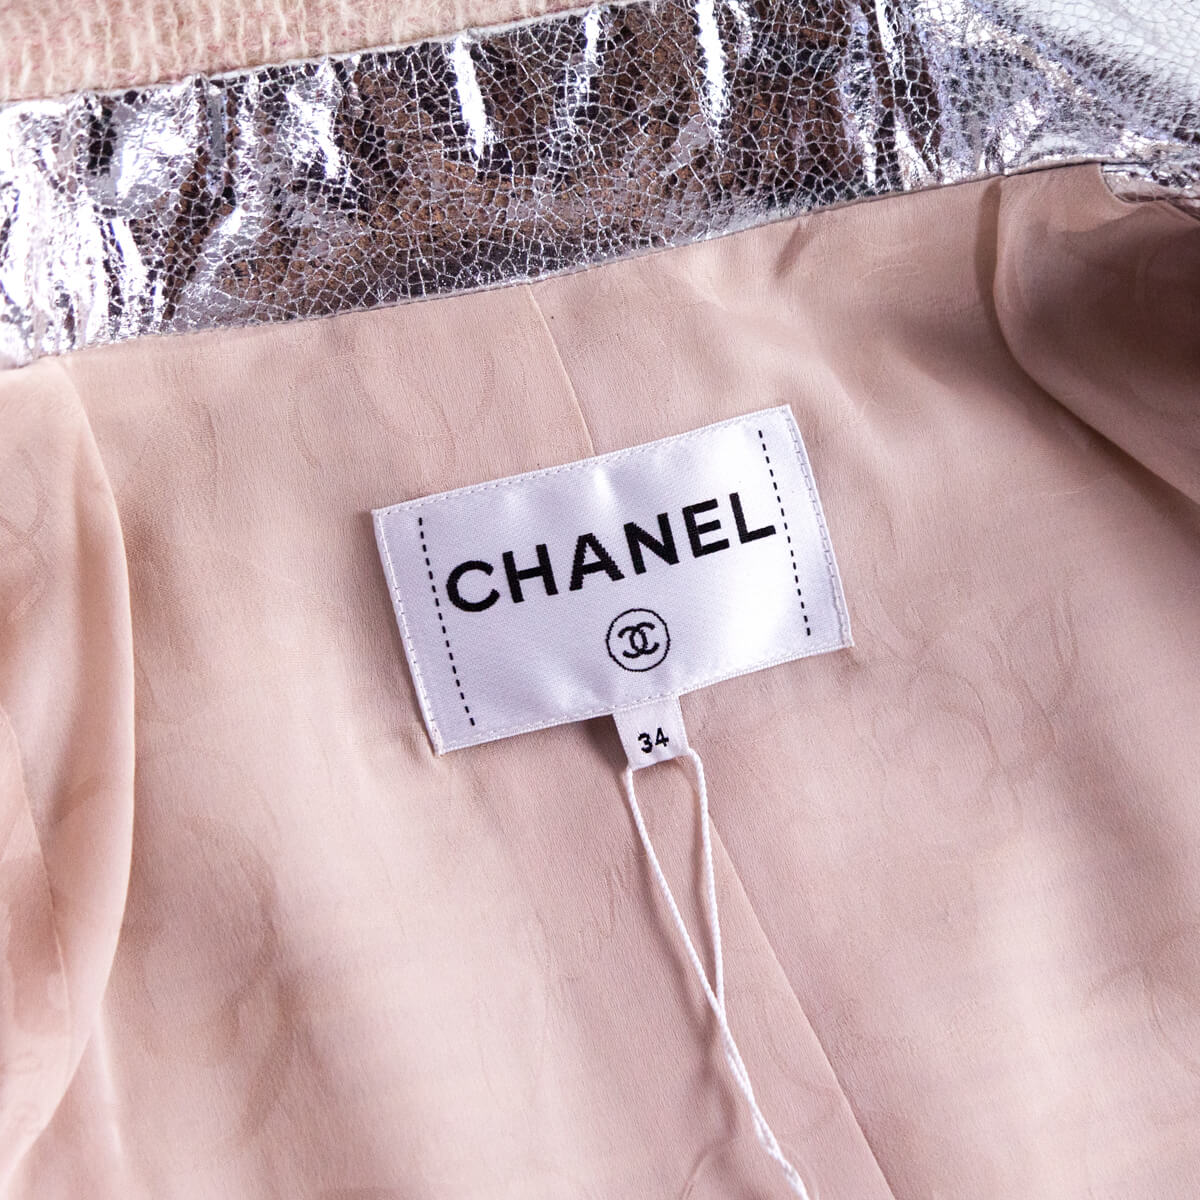 Chanel Pale Pink Mohair Silver Trim Single Breasted Jacket